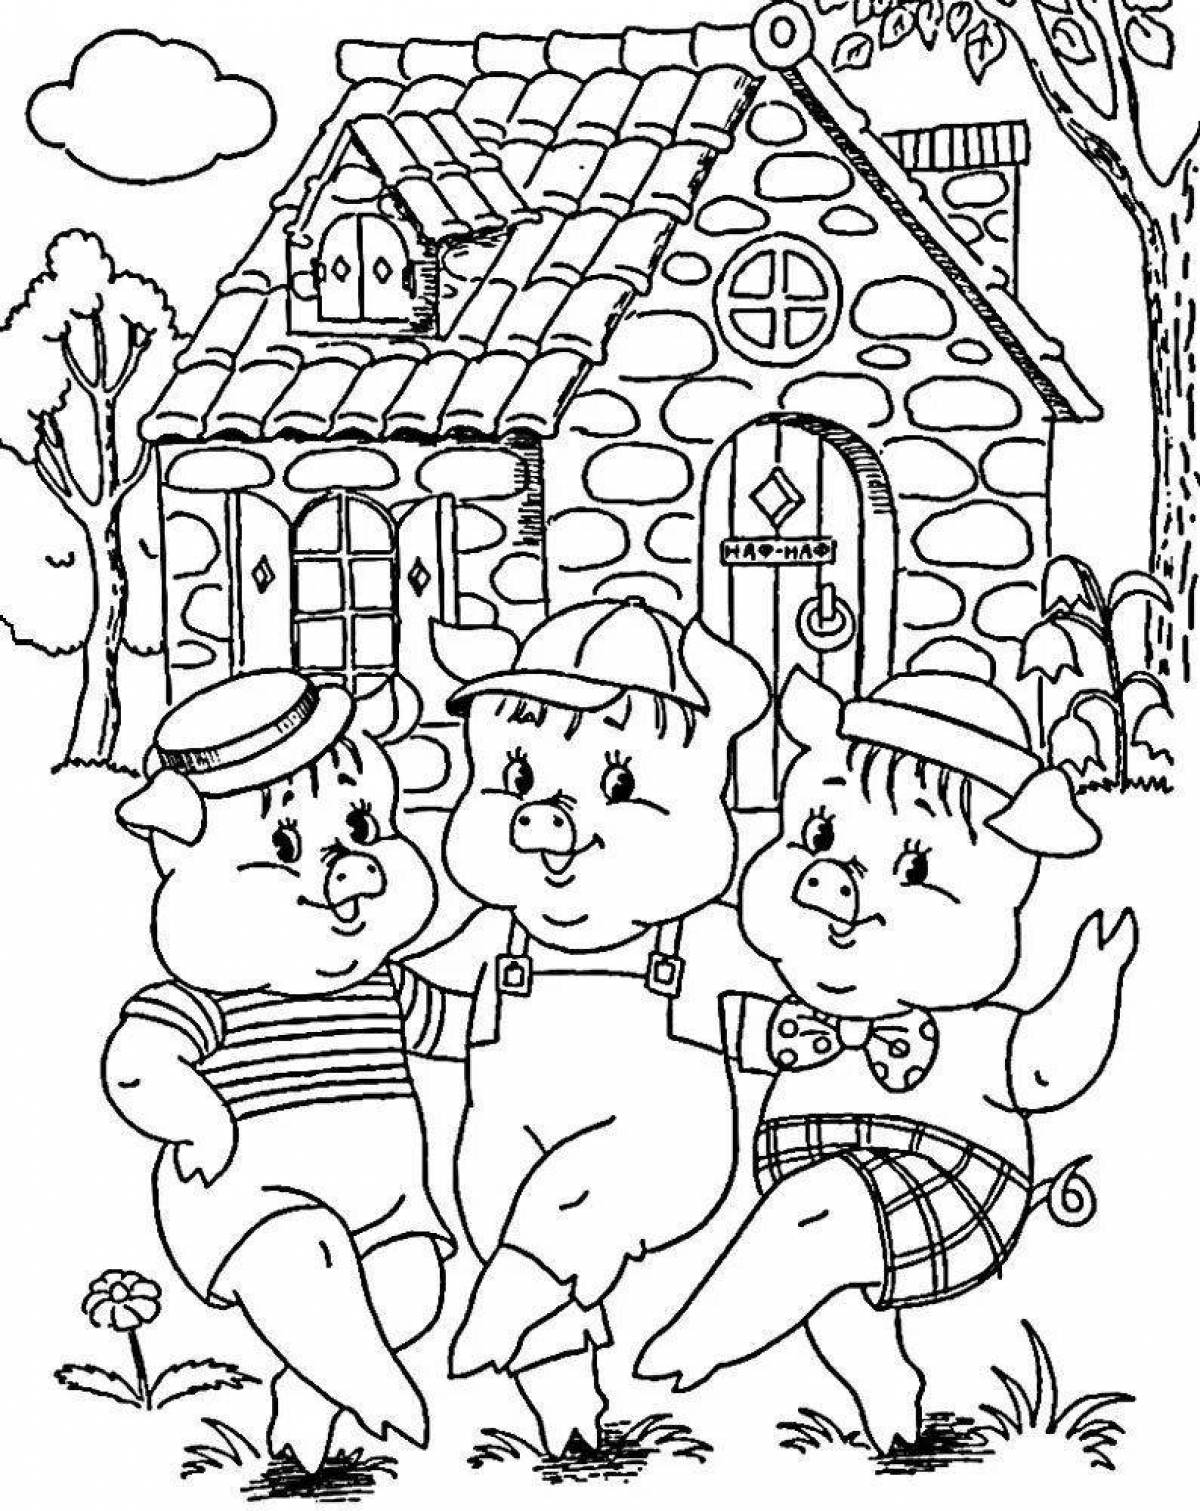 Adorable fairy tale characters coloring book for toddlers